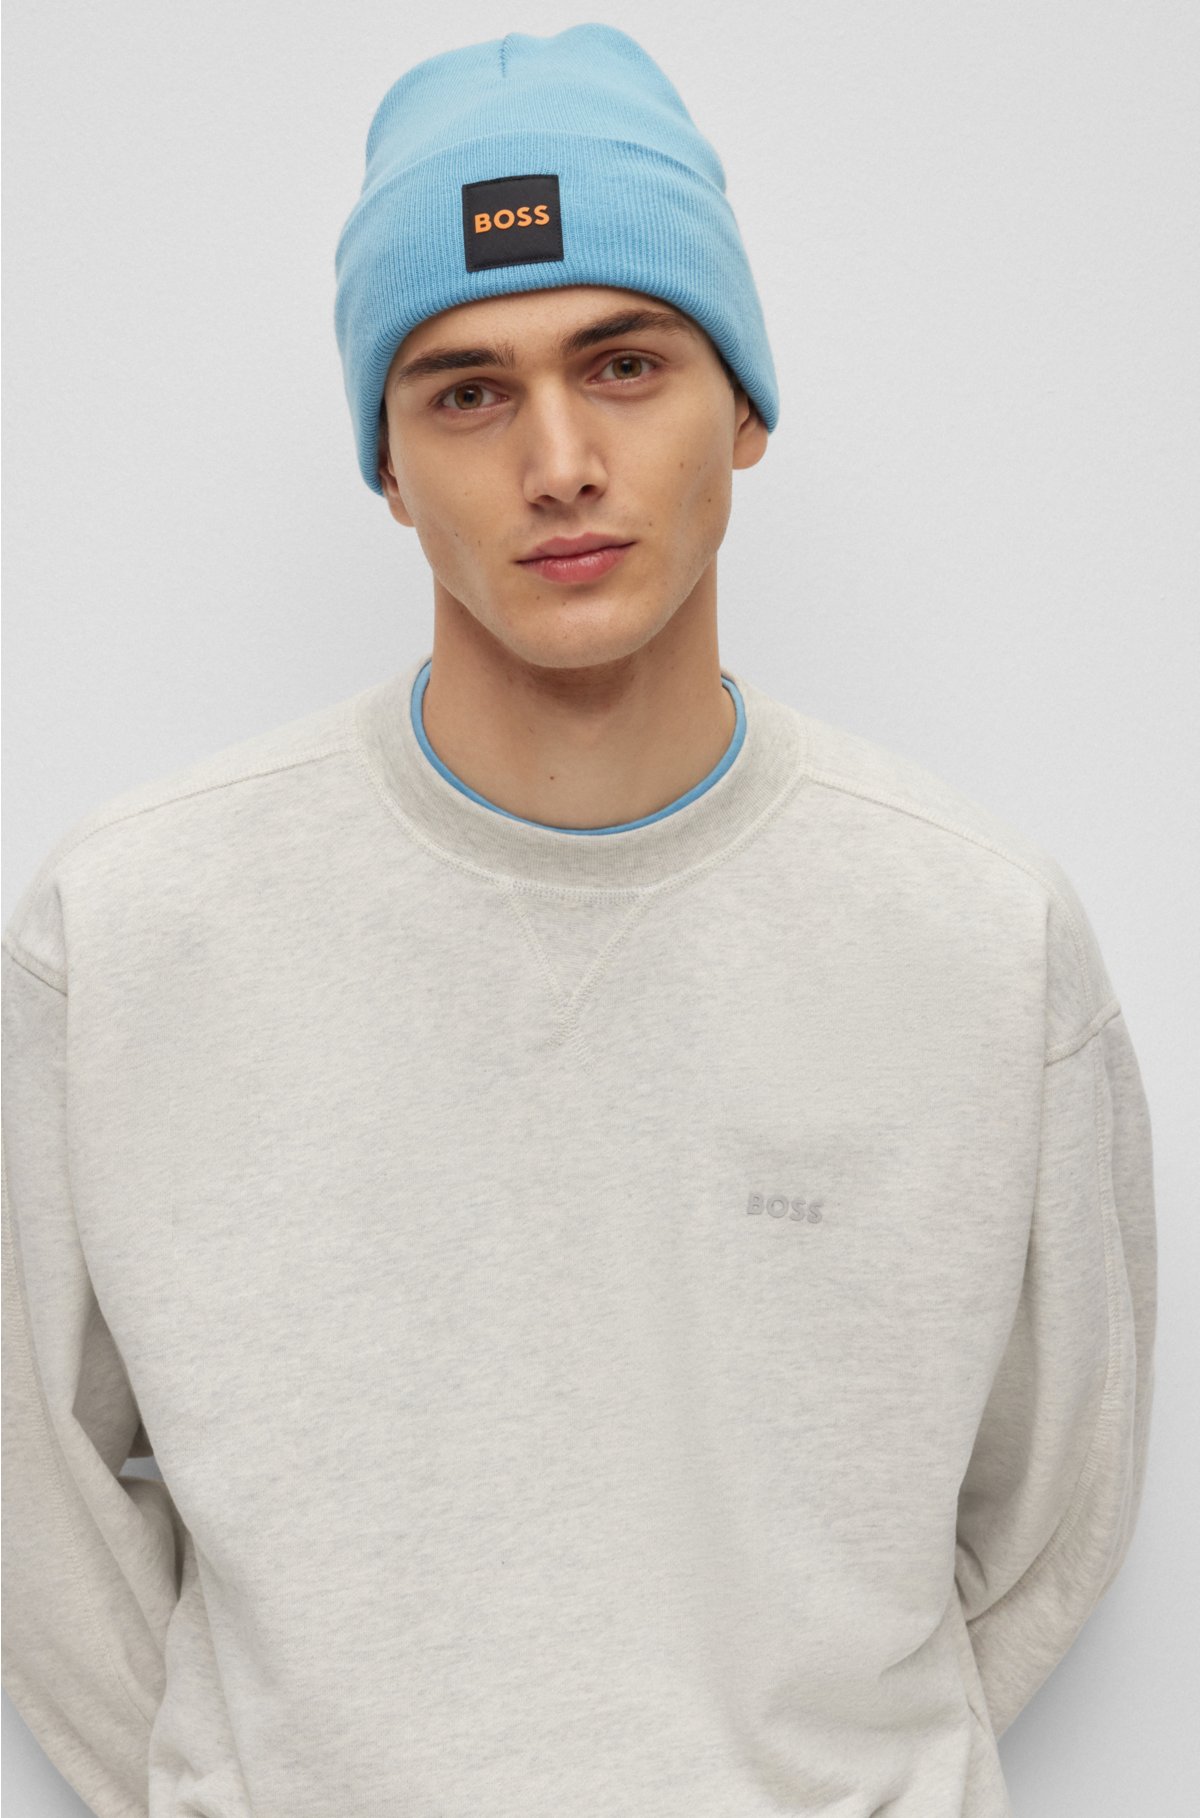 Pull on Hat with Logo By Hugo Boss